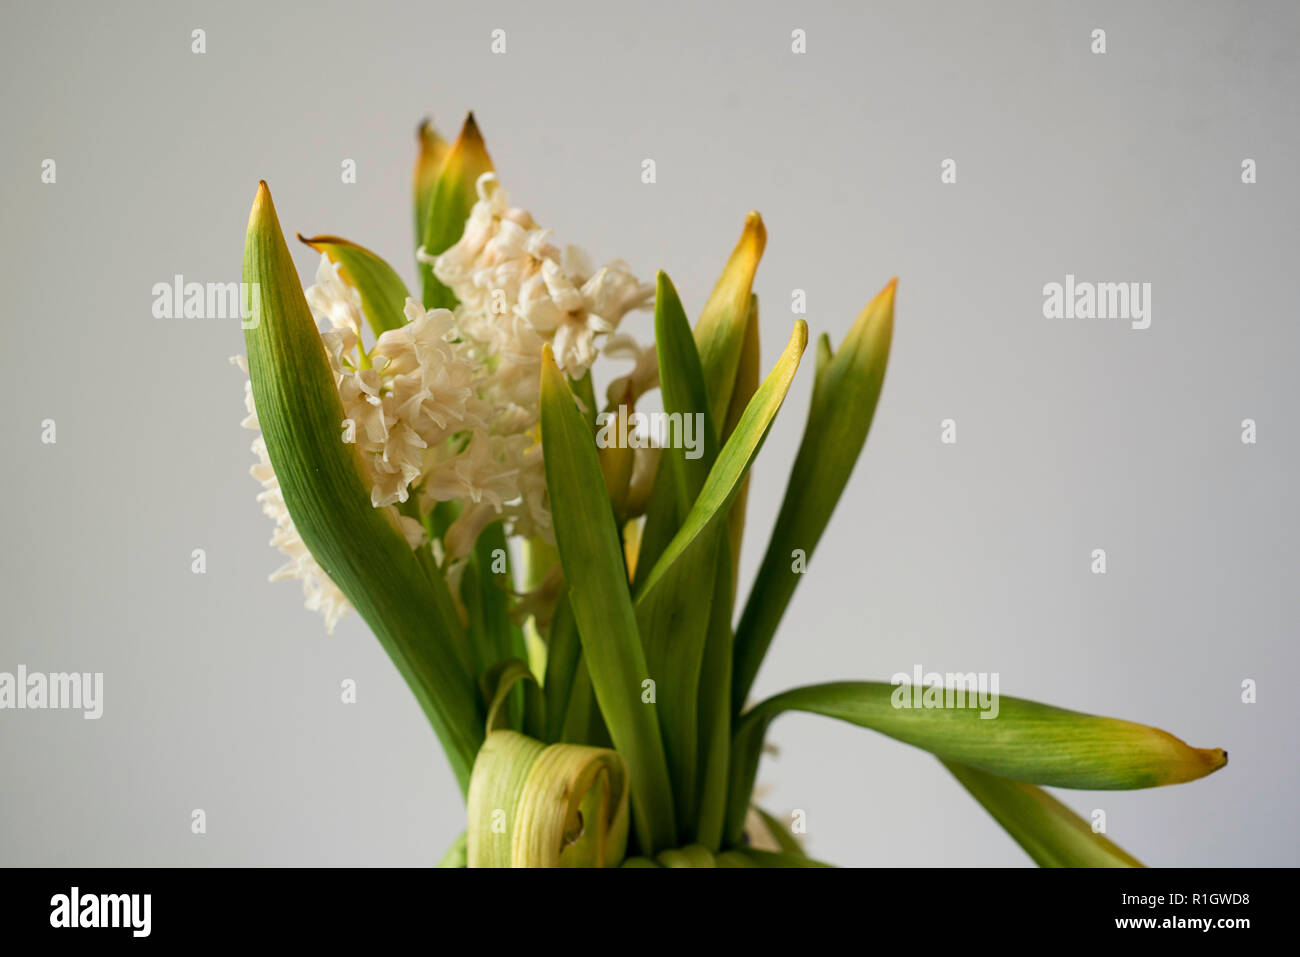 Limp Floral Bouquet Wilting on a Light Background Stock Photo